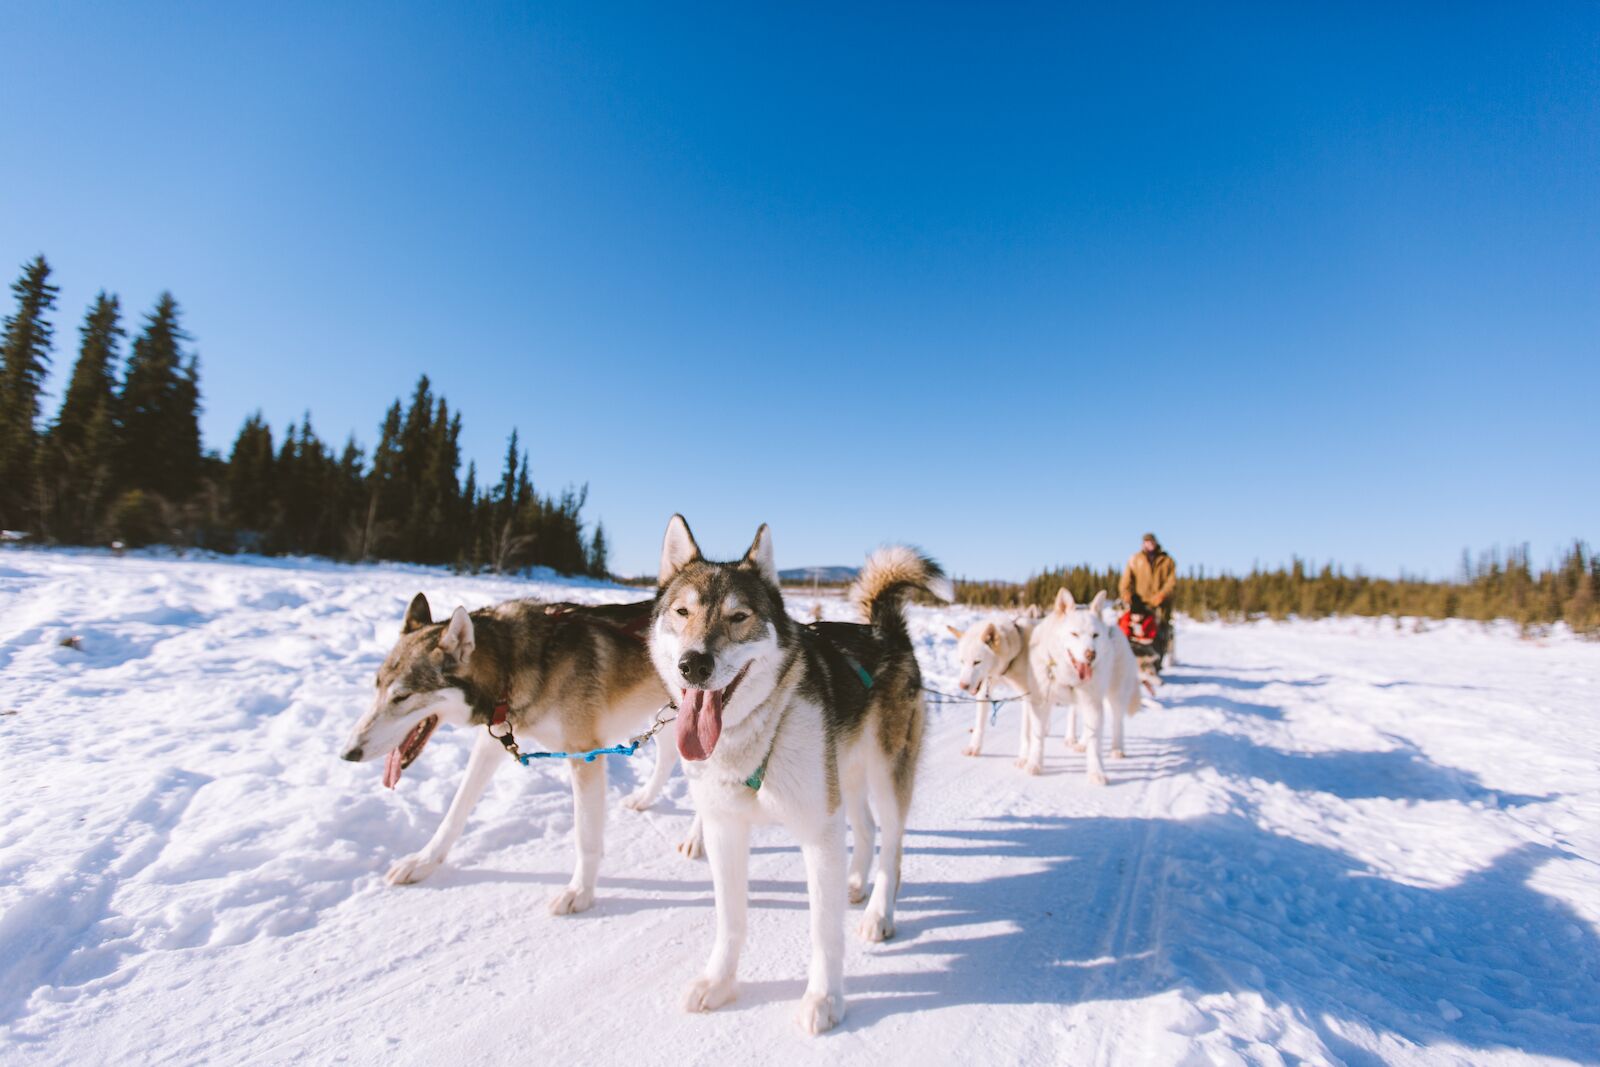 Dog sledding in Fairbank, Alaska in winter. Fairbanks is one of the best cold-weather Spring-Break destinations for 2022